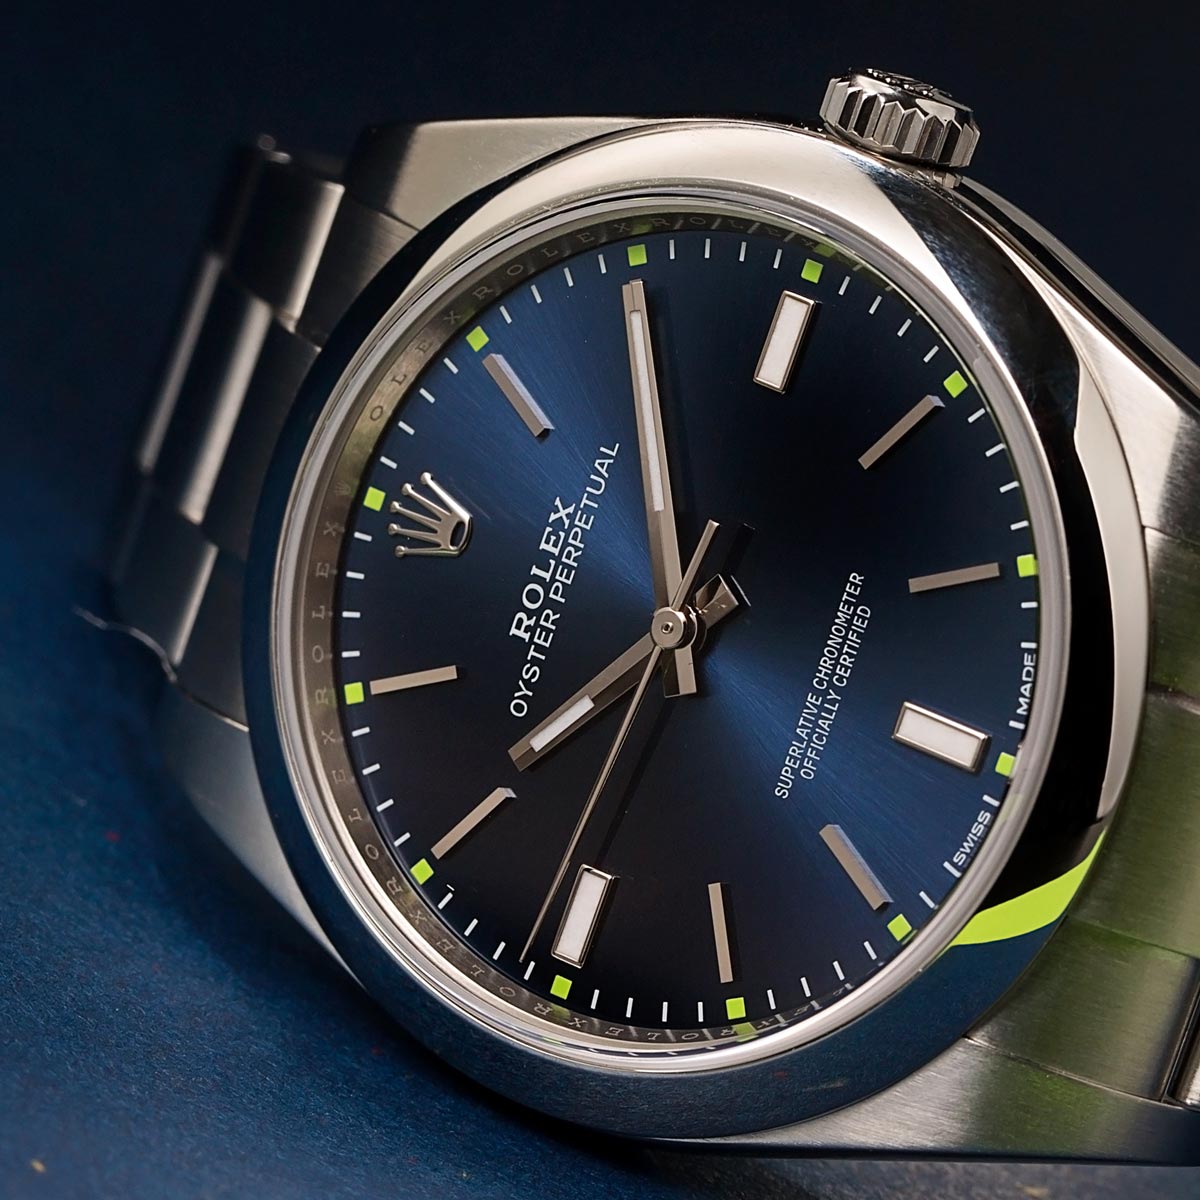 Rolex Oyster Perpetual: The Precursor to the Tool Watch